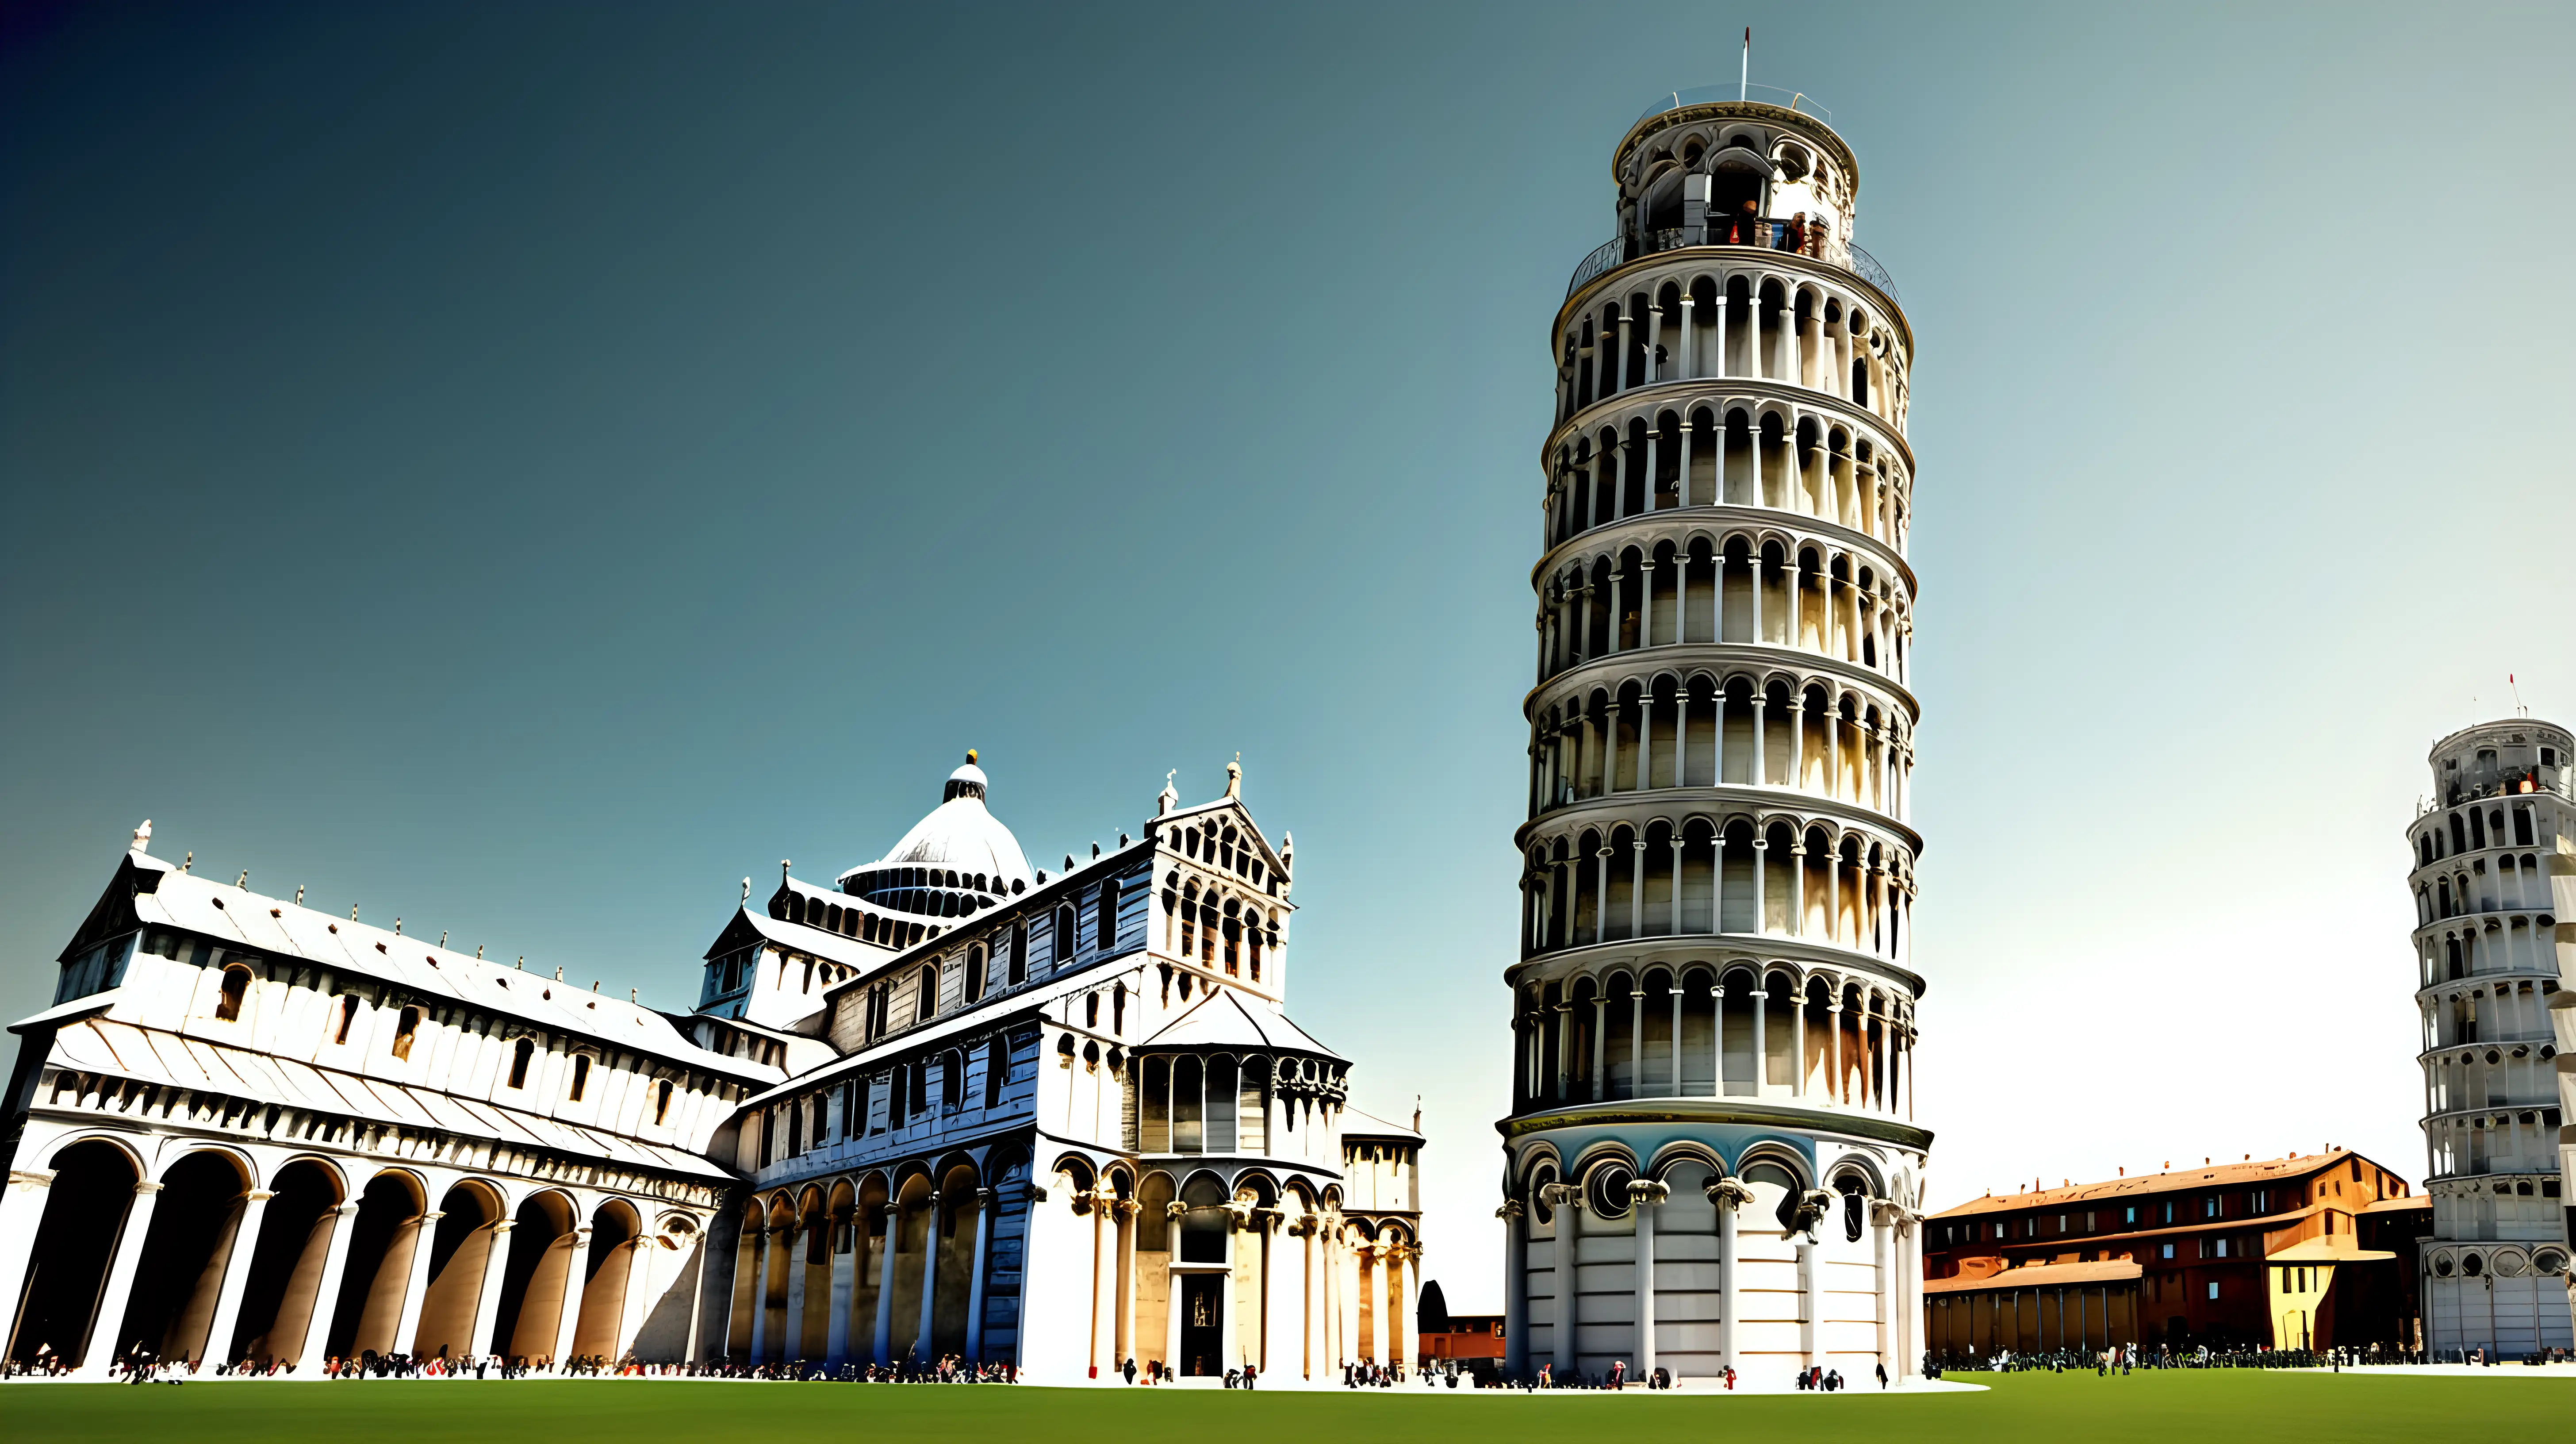 Majestic Leaning Tower of Pisa Iconic Beauty Captured in Wide Angle View